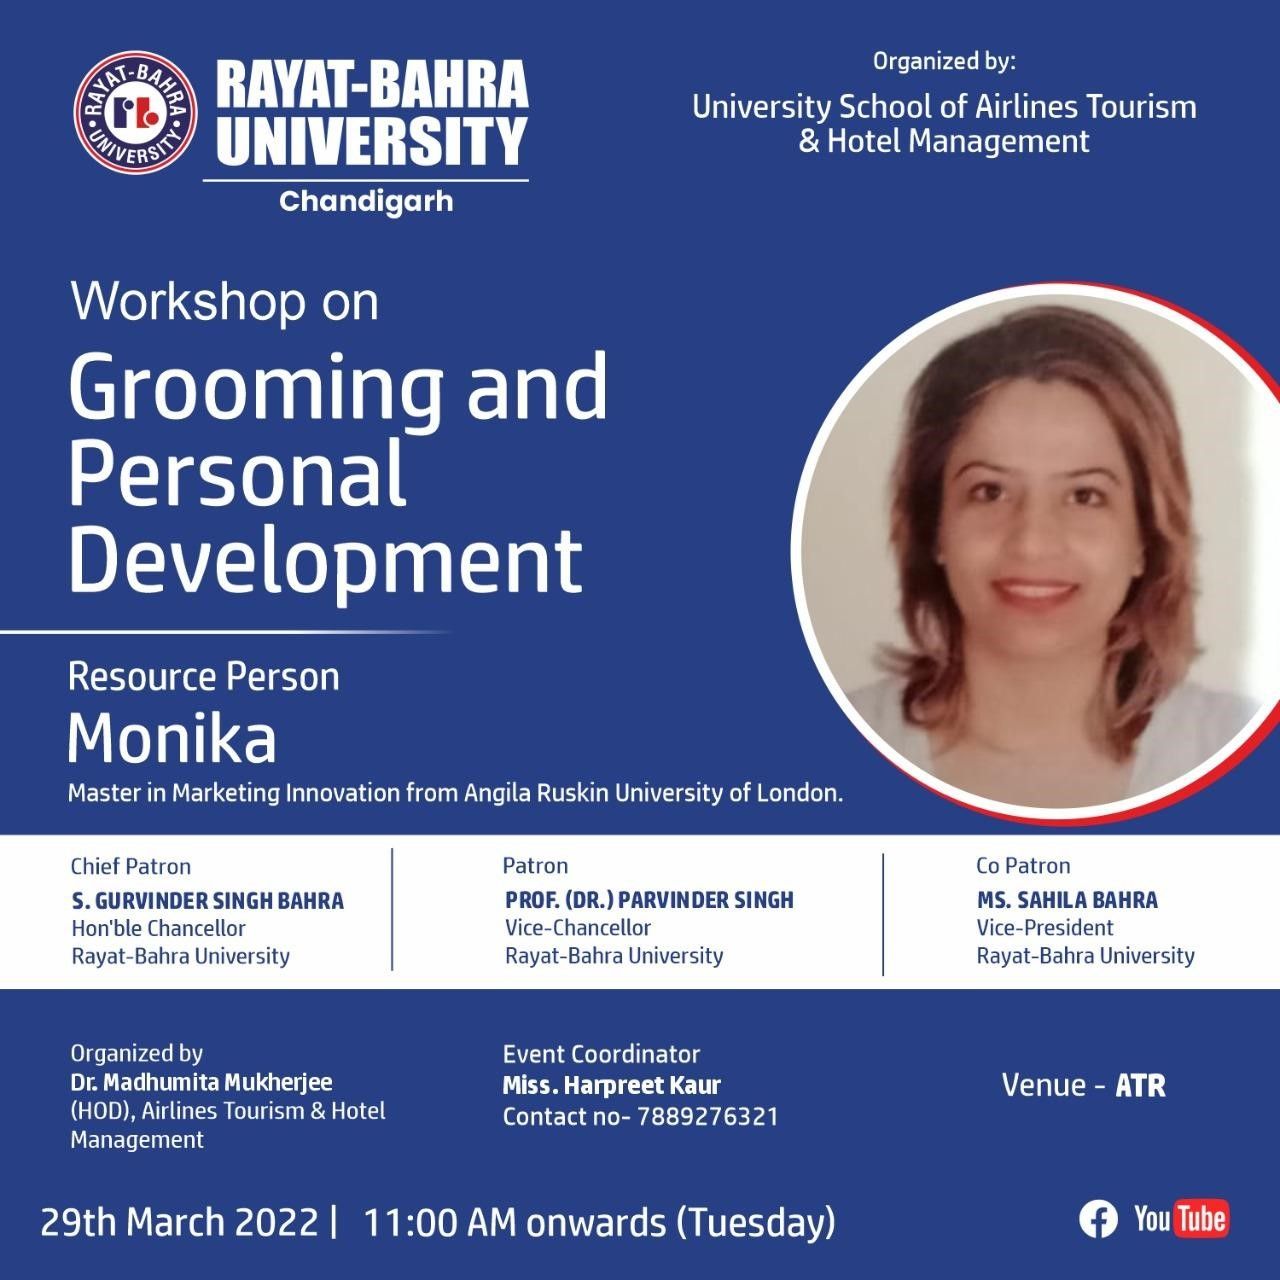 A workshop on grooming and personal development